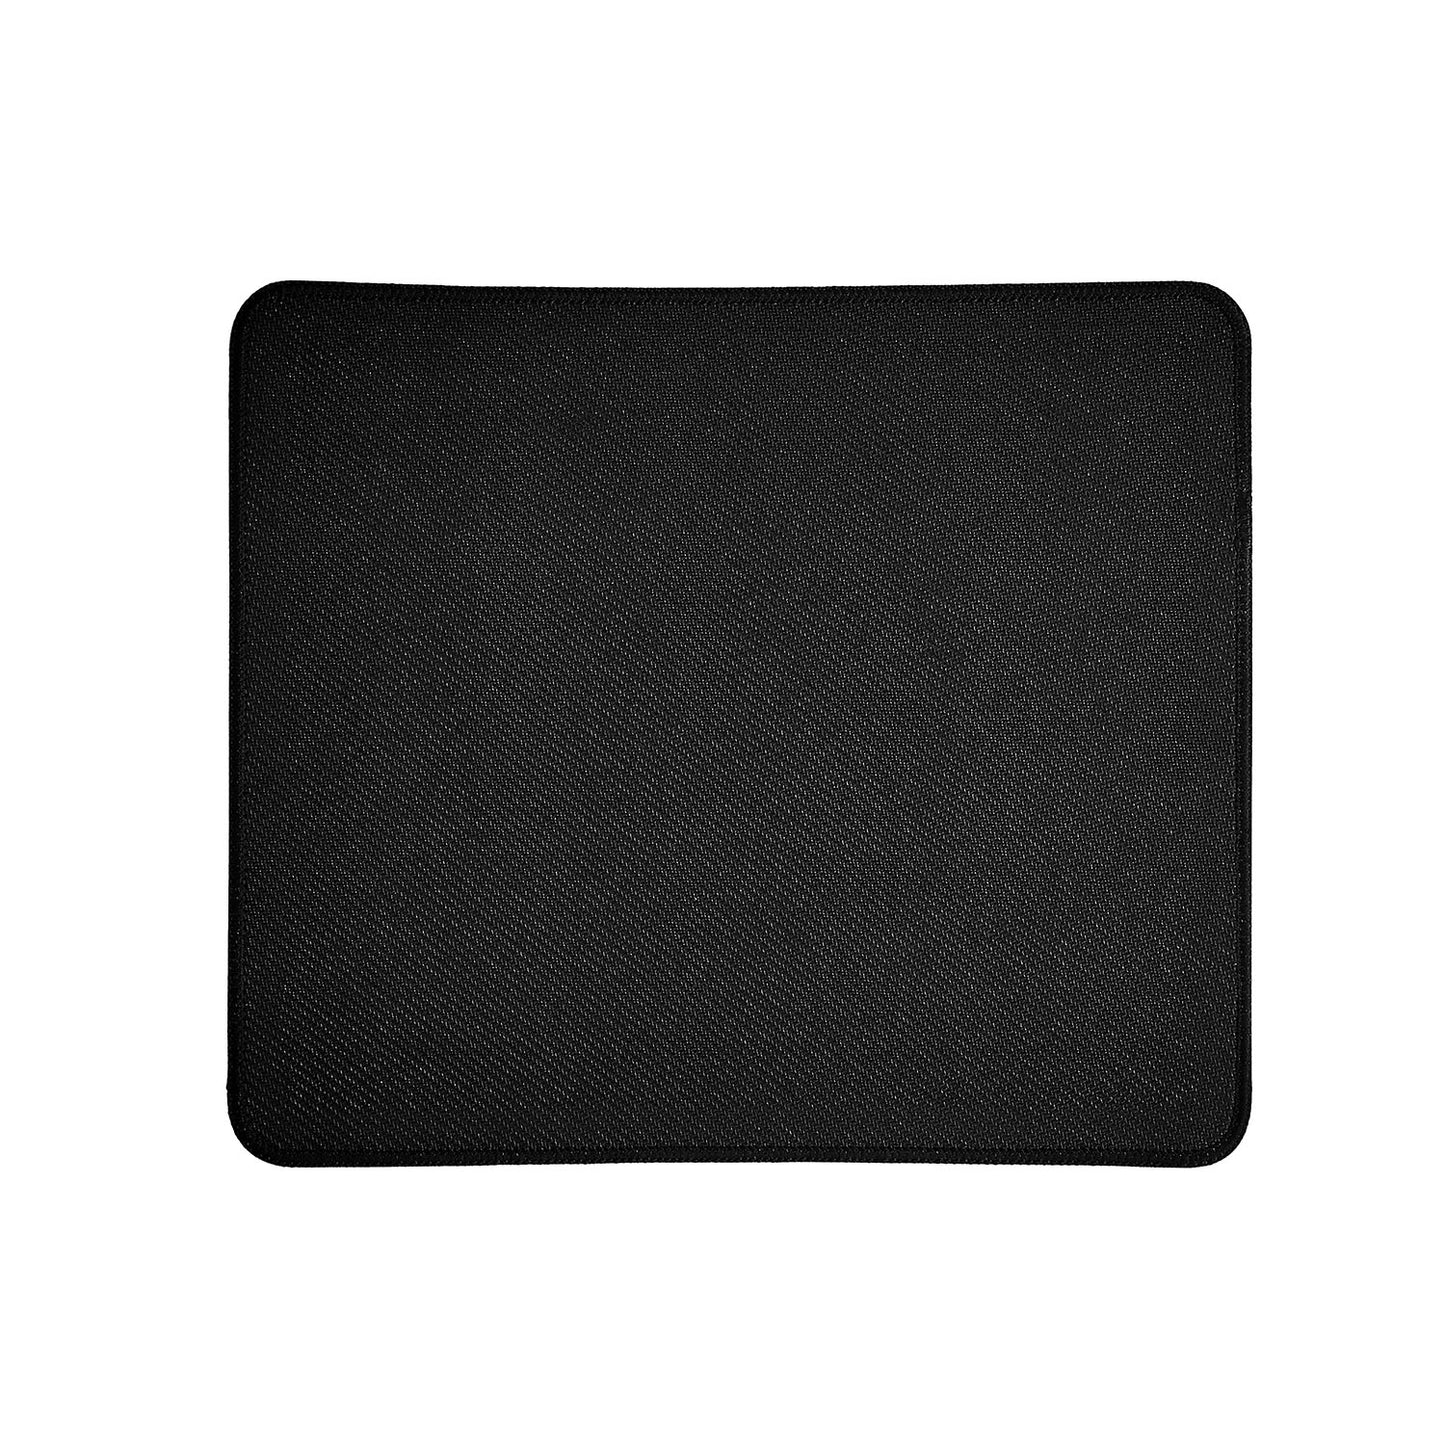 Hurricanes Mouse Pad